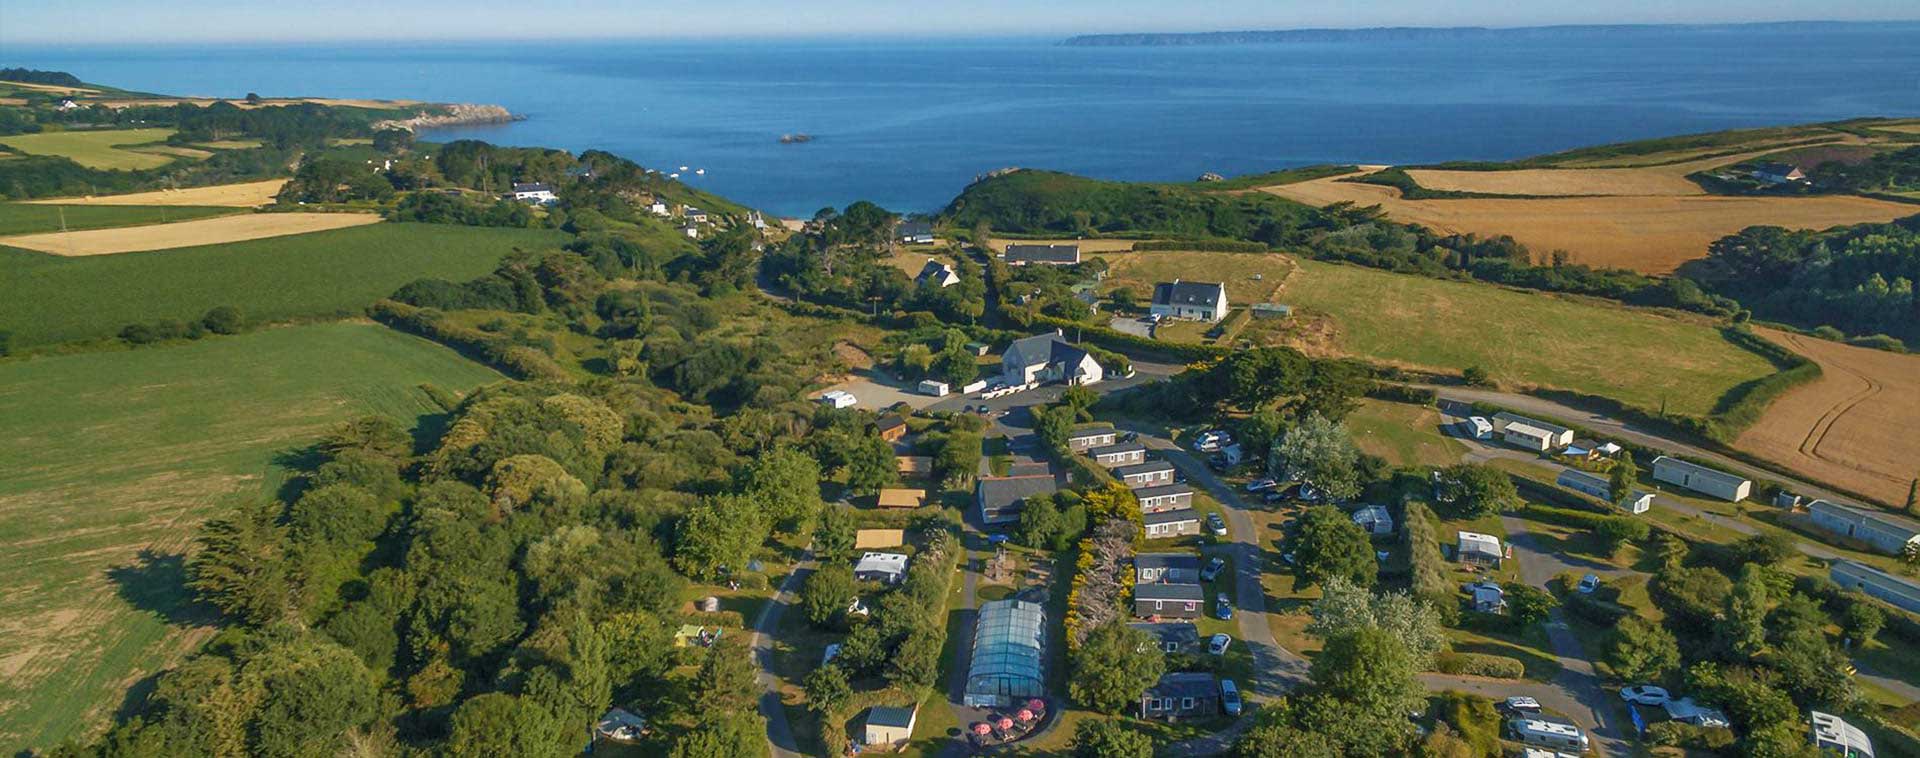 Campsite Pors Peron, access and contact, for unforgettable vacation in Brittany